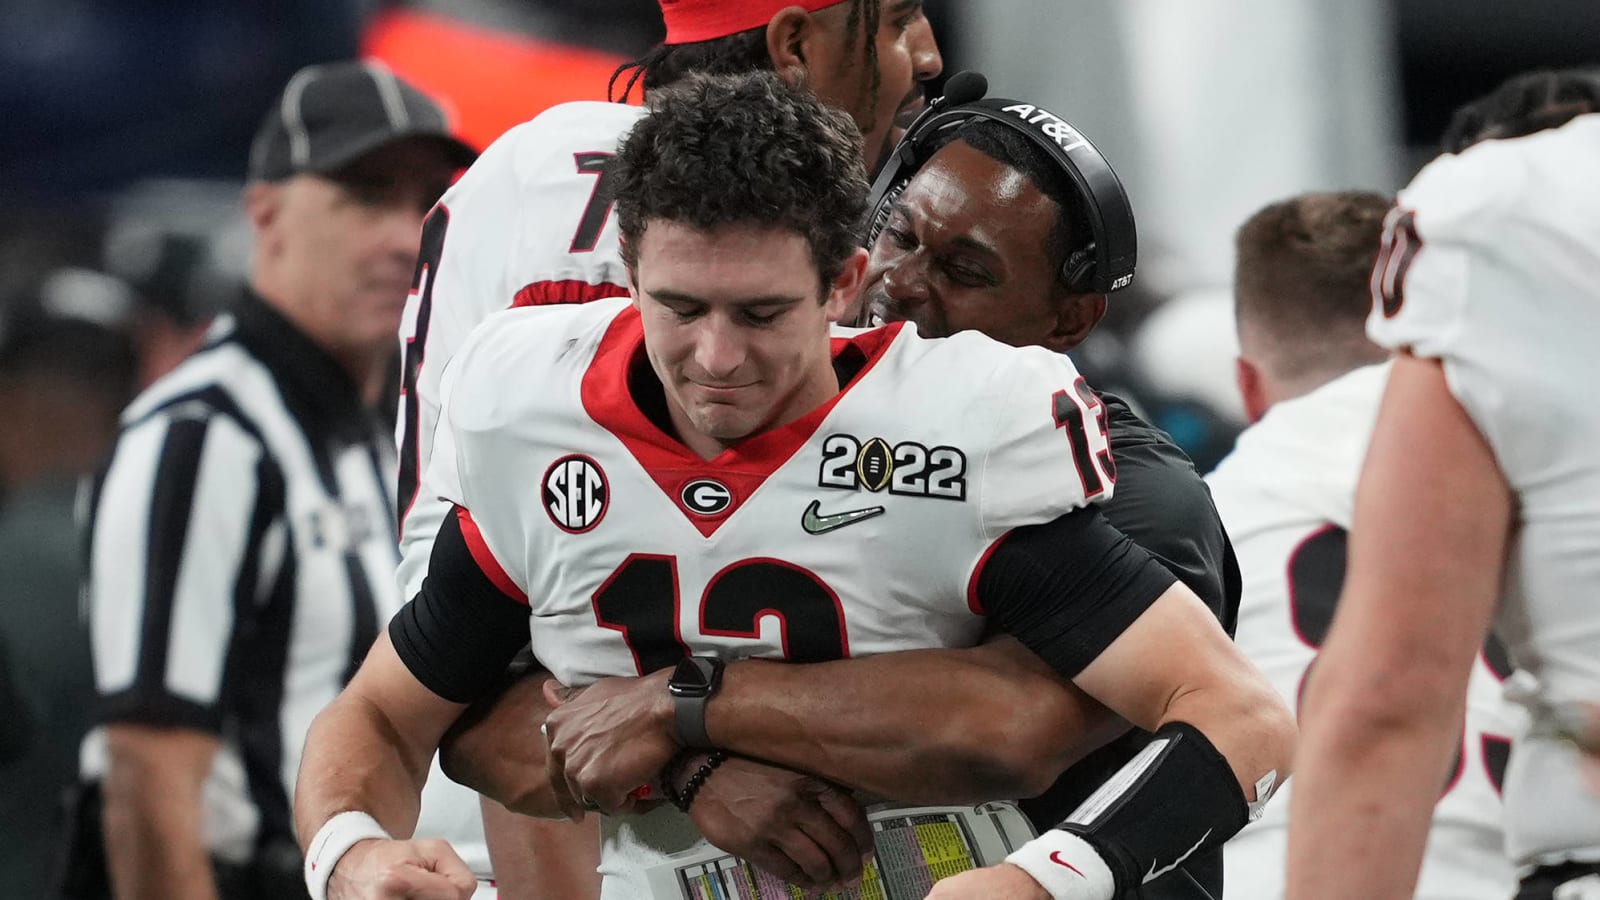 Georgia beats Alabama to win first national championship in 41 years